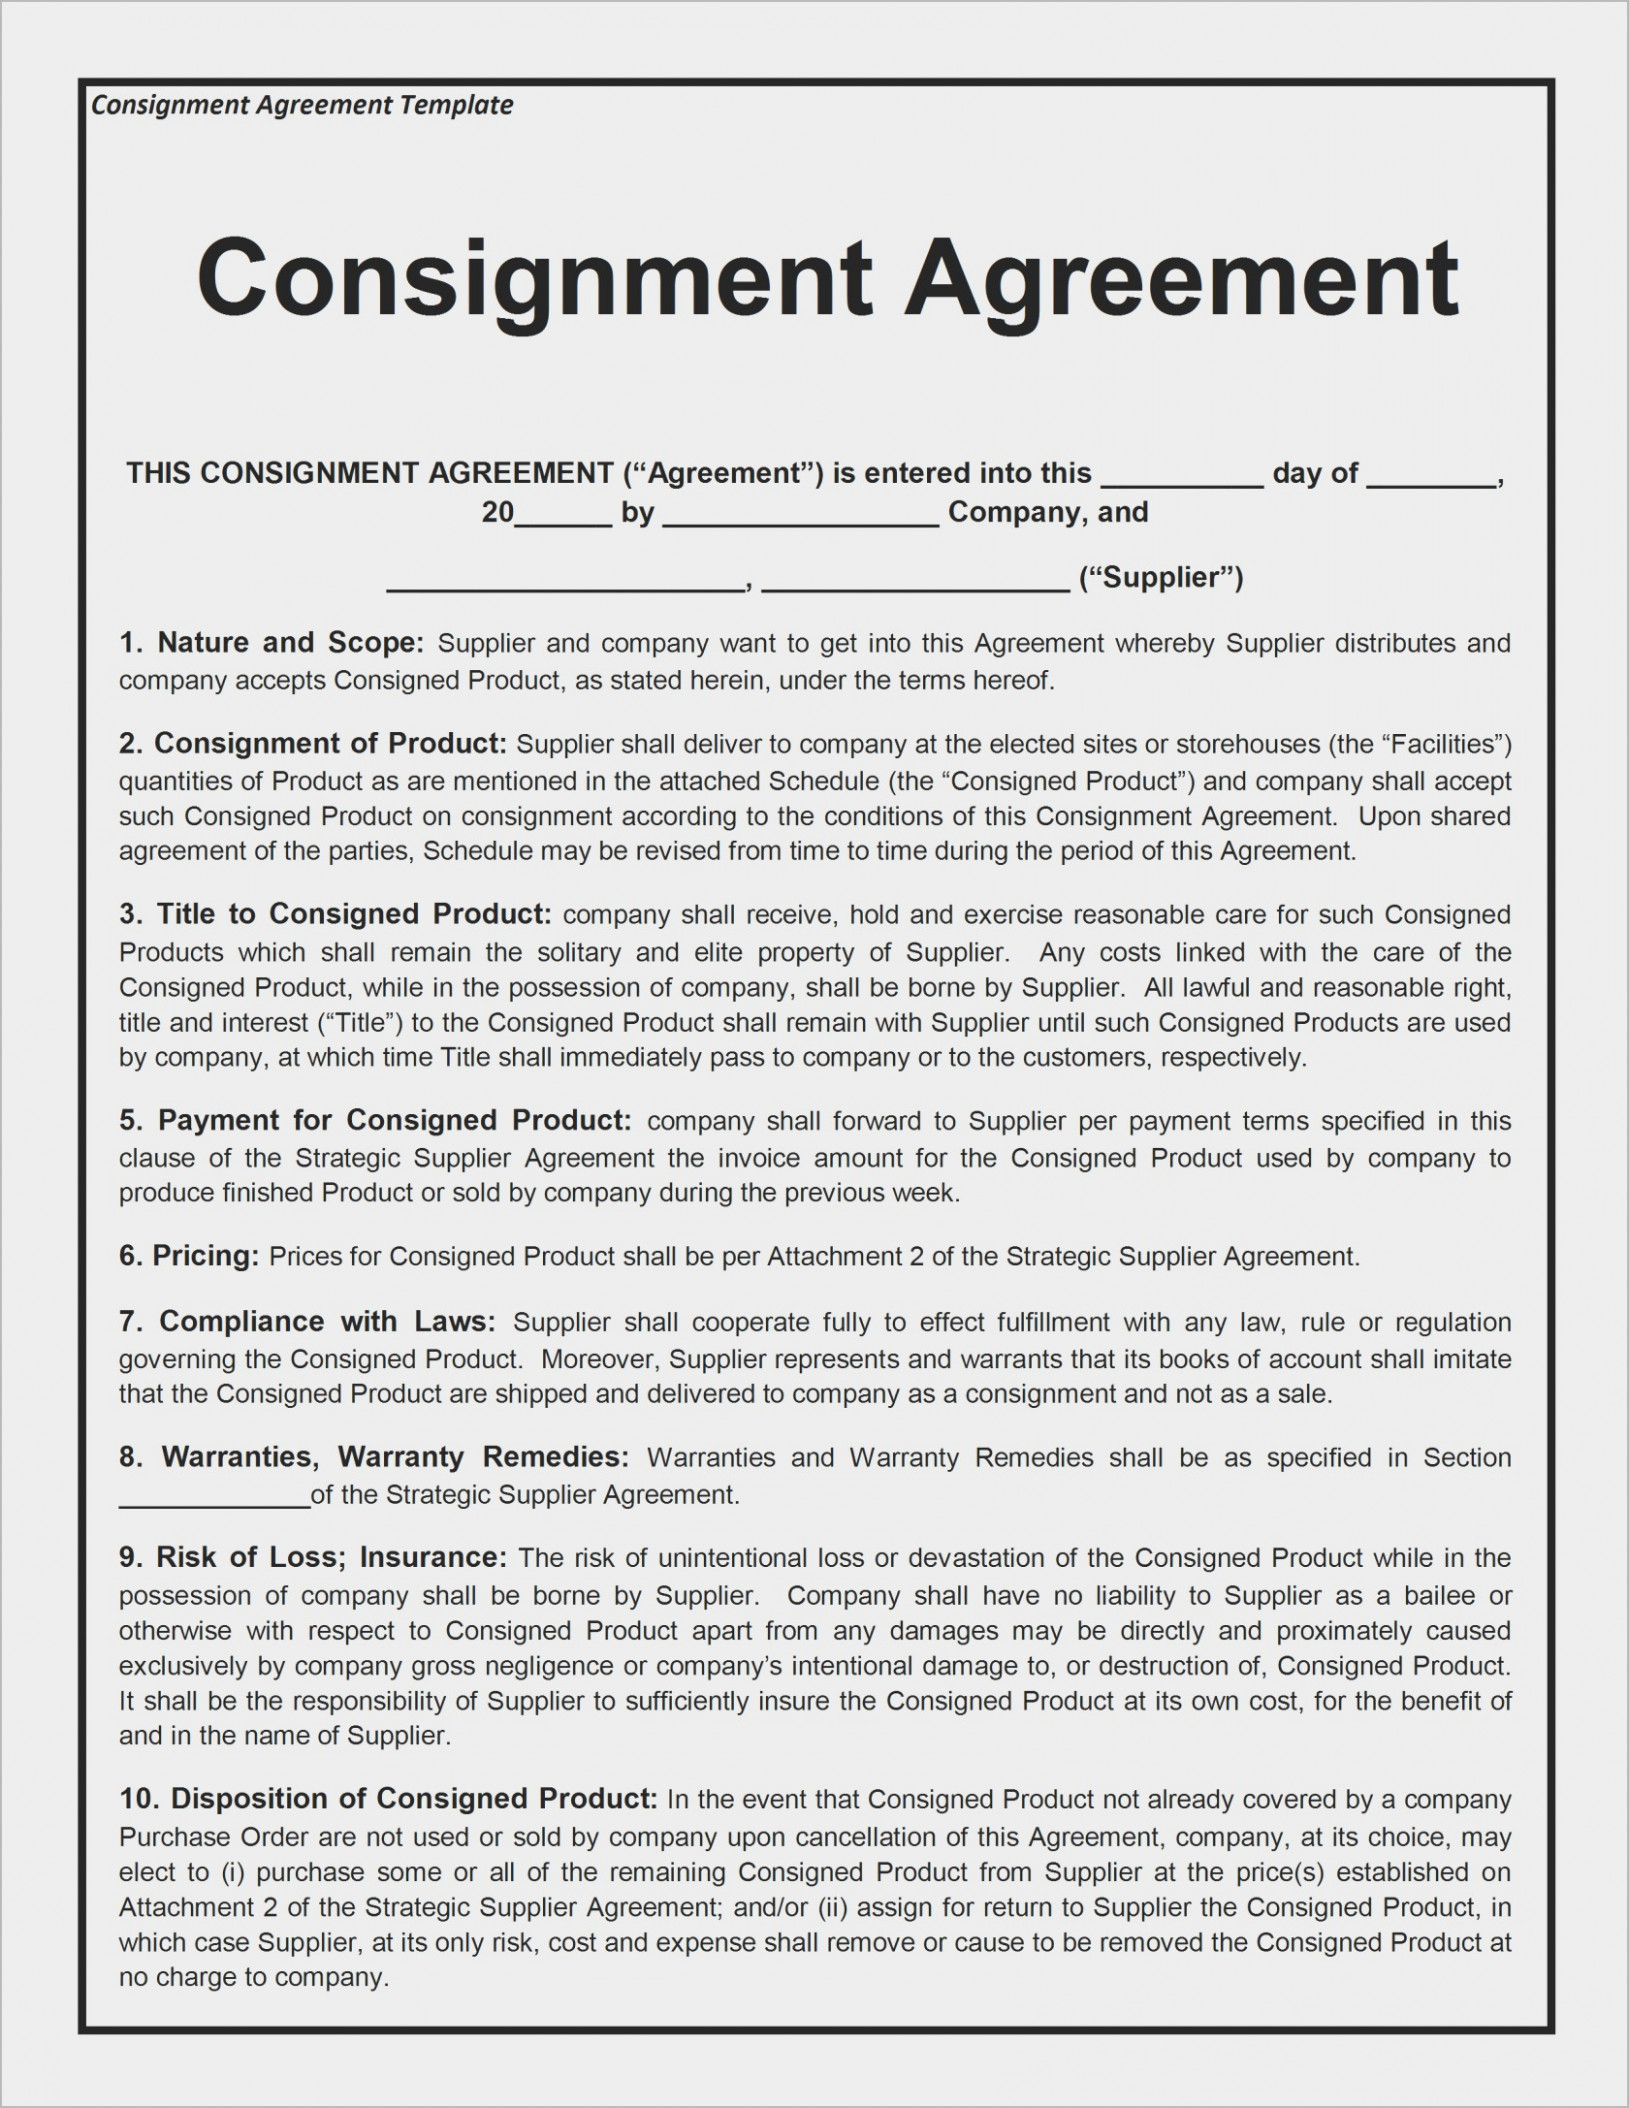 Gallery Consignment Agreement 15 Brilliant Ways To Realty Executives Mi Invoice And Resume 1557